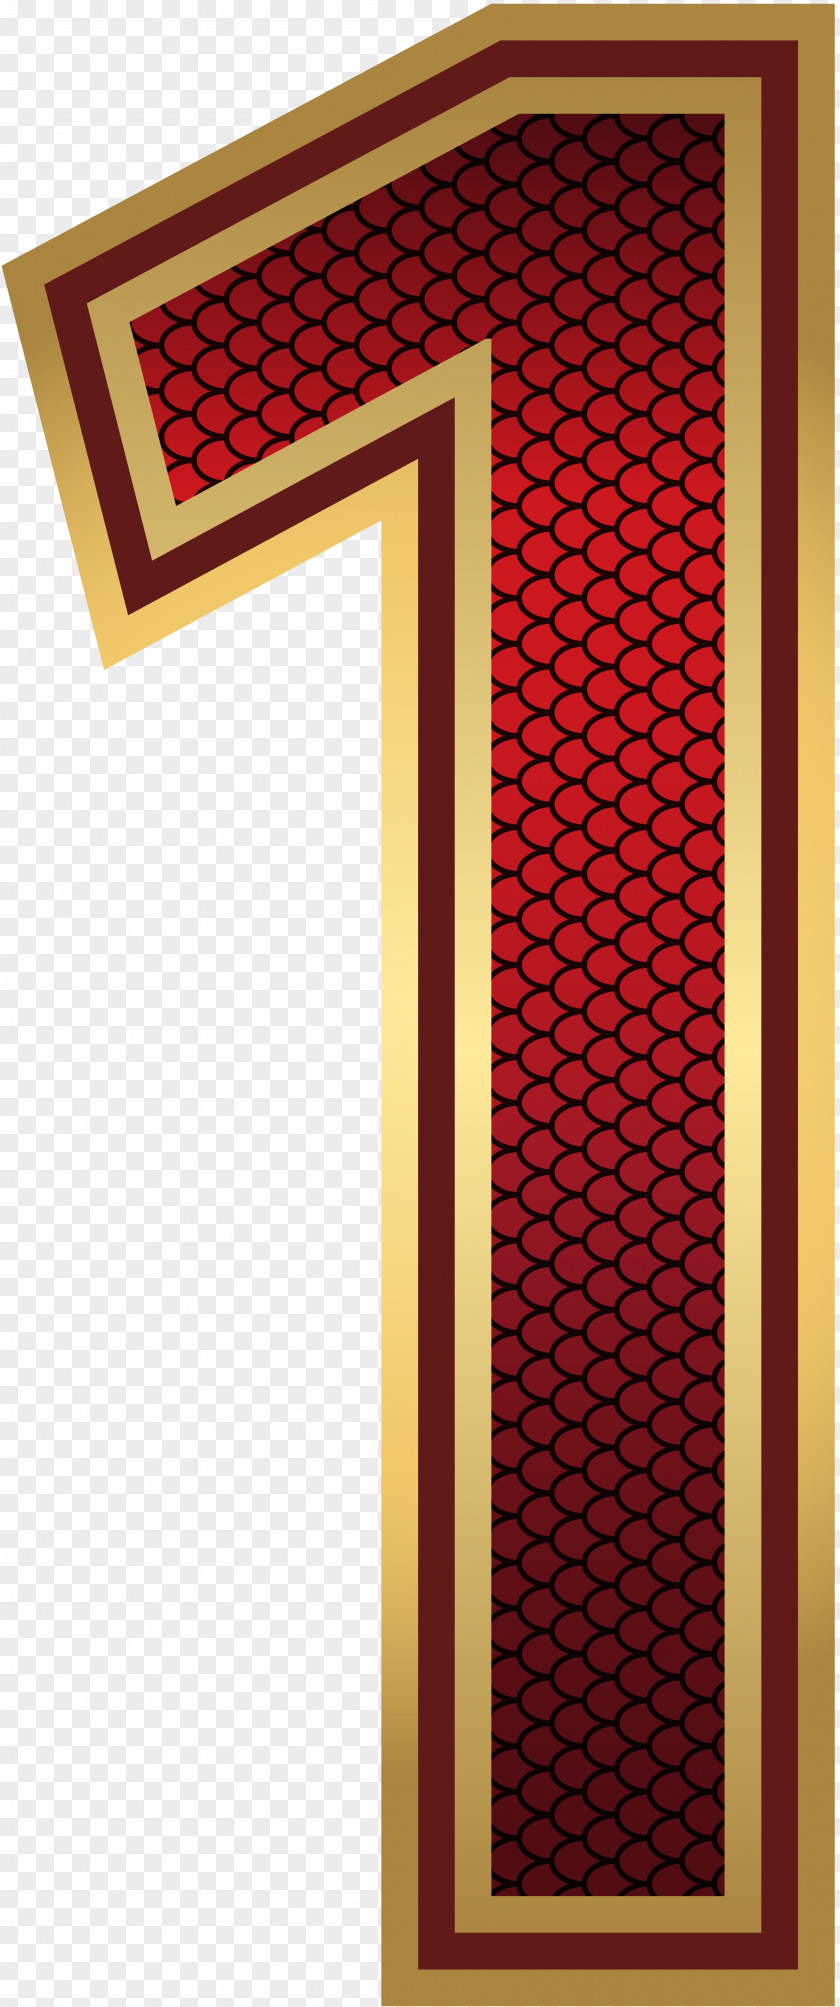 Red And Gold Number One Image PNG